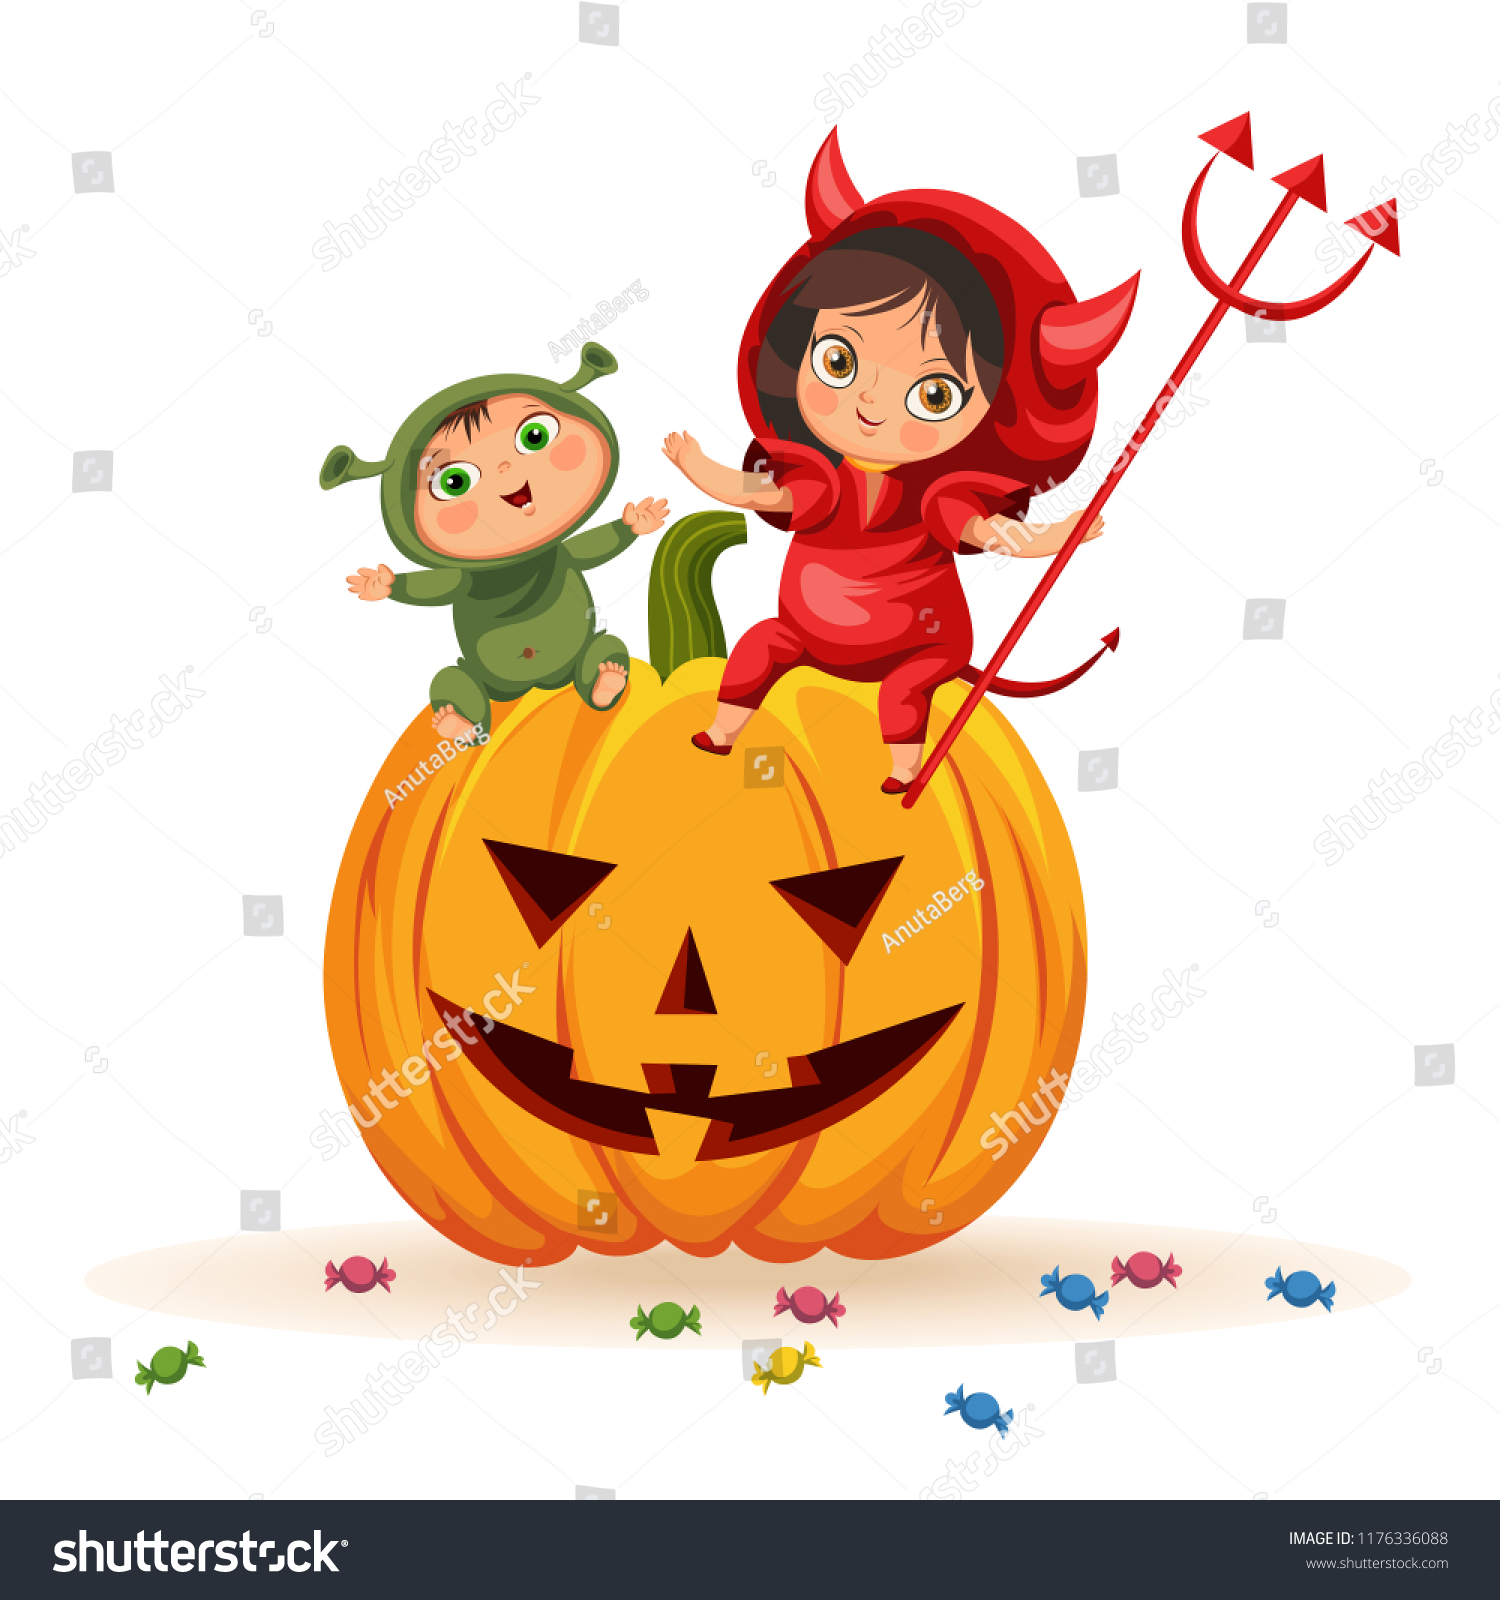 SVG of Cartoon kids sitting on Halloween pumpkin poster. Happy children in Hallows mystery costumes of shrek and devil having funny time. Family horror party concept. svg